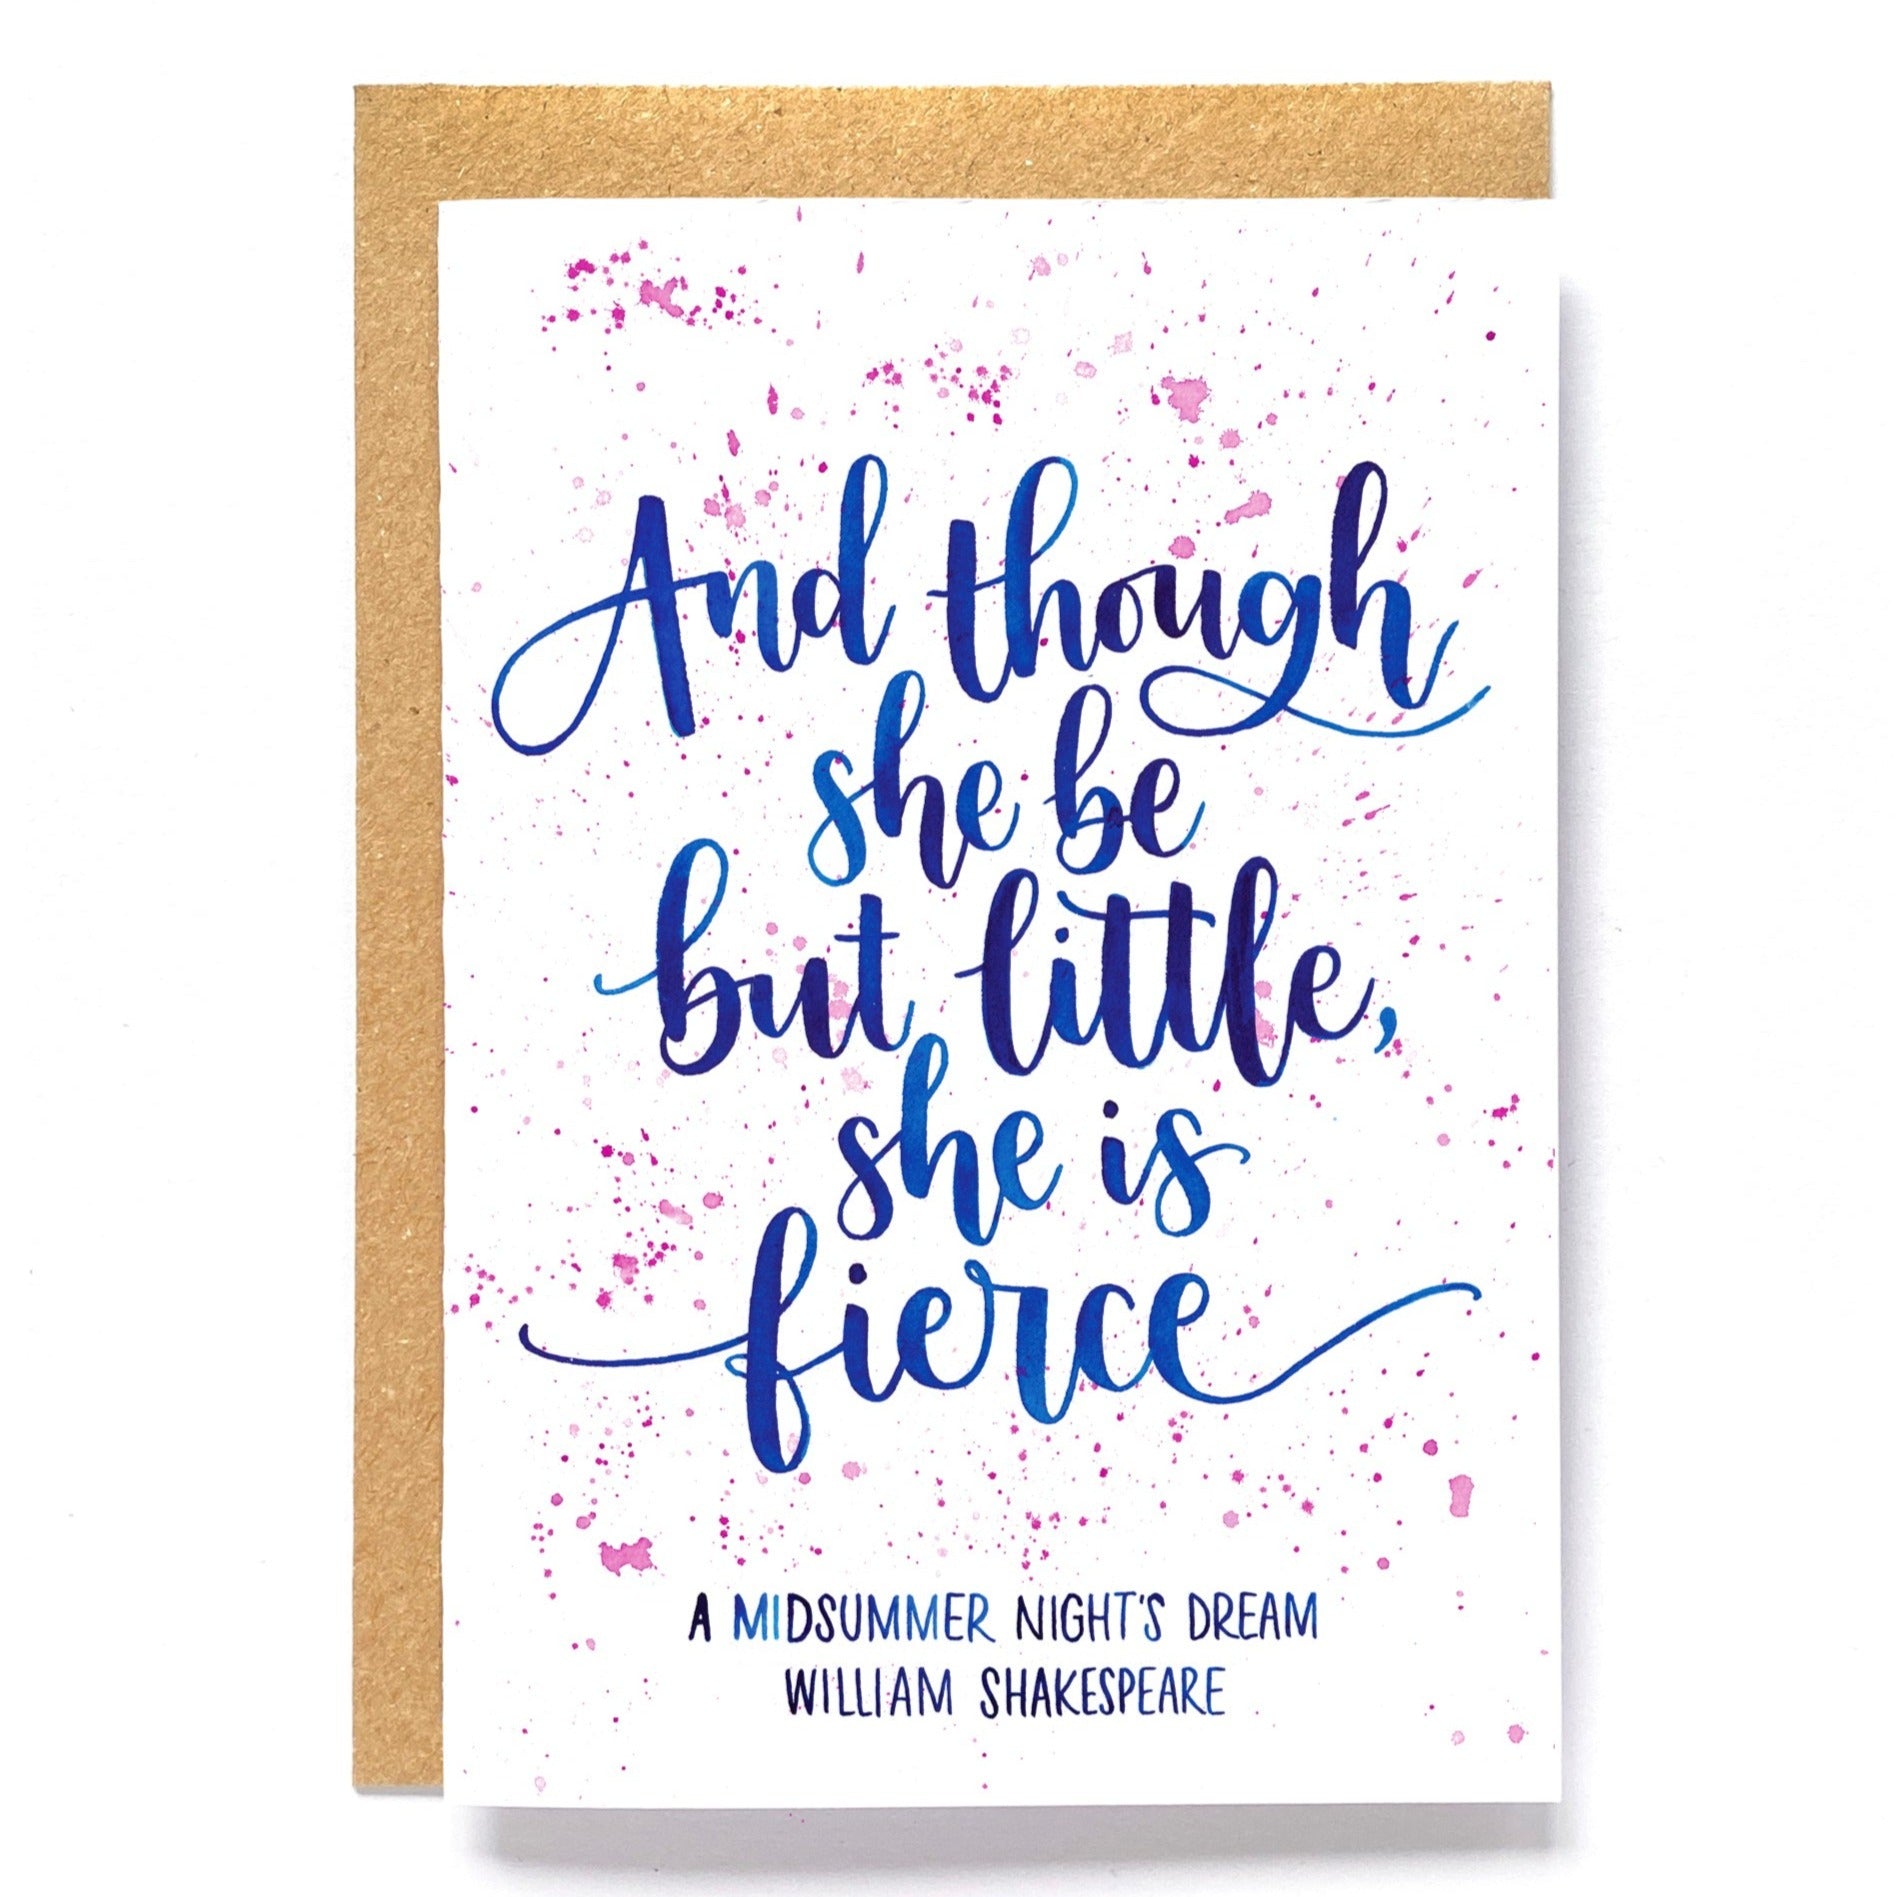 Empowering feminist greetings card - And though she be but little, she is fierce